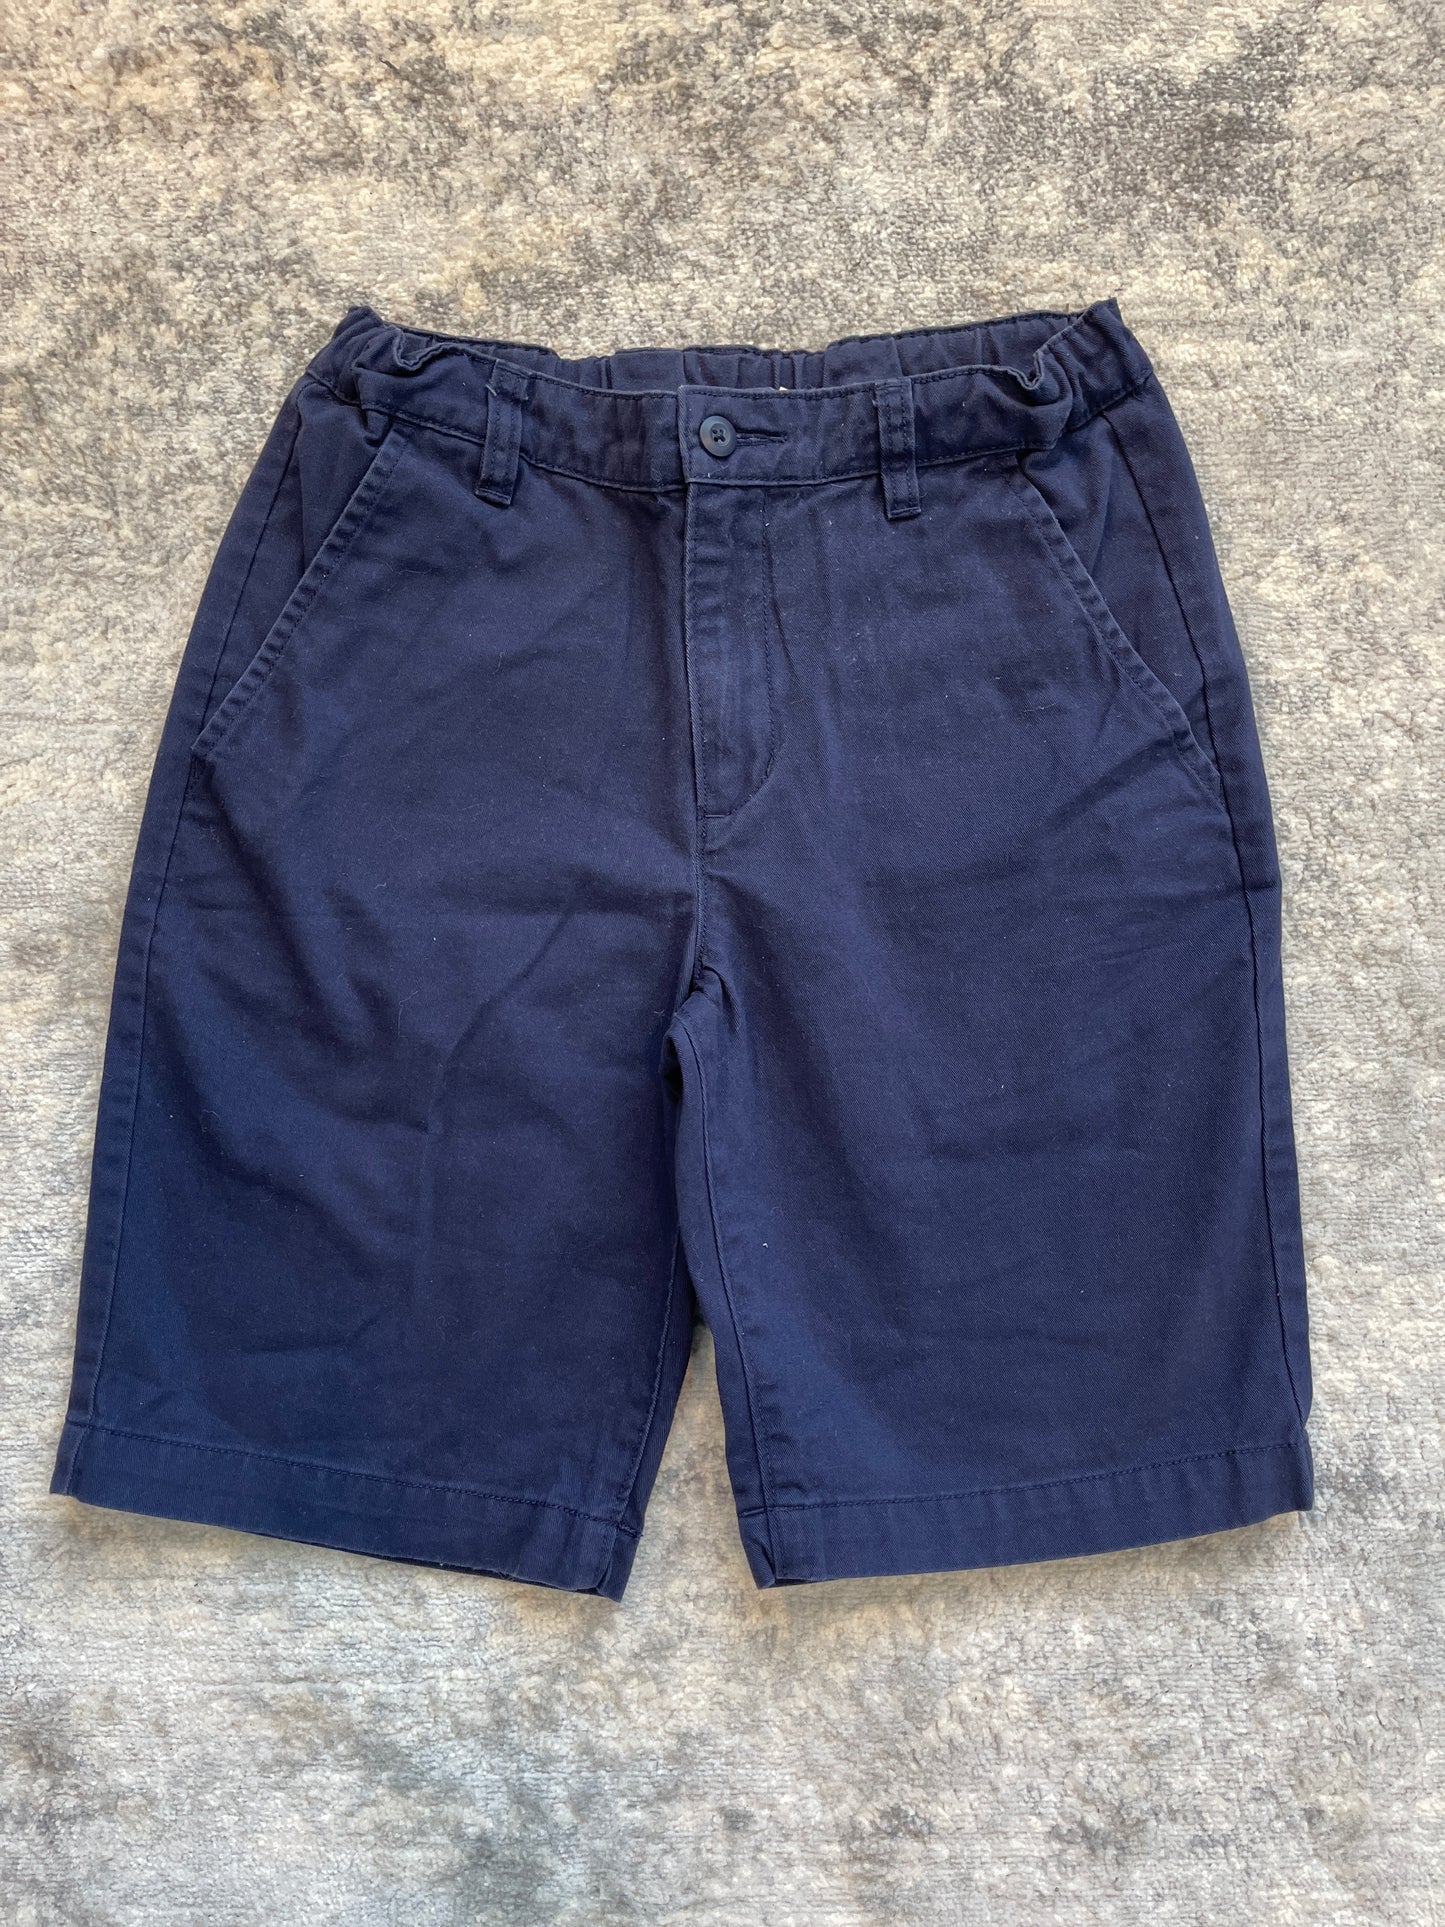 Hanna Andersson 150 (12) Cotton Twill Navy Blue Boy's Chino Shorts- PPU Montgomery